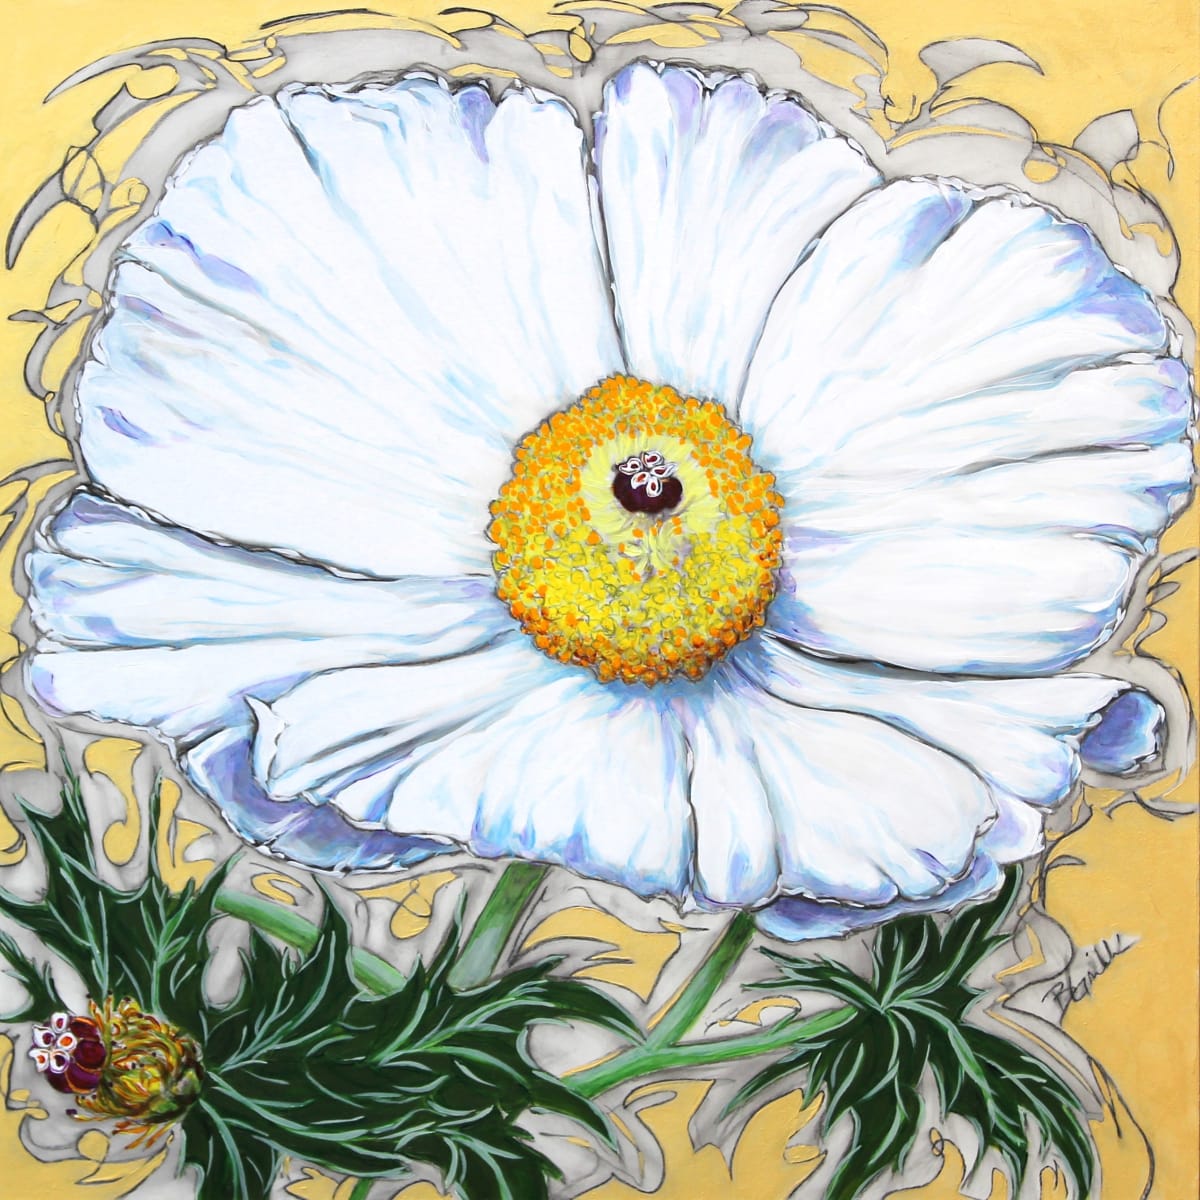 Was and Is by Brenda Gribbin  Image: White Poppy bloom on a Golden background